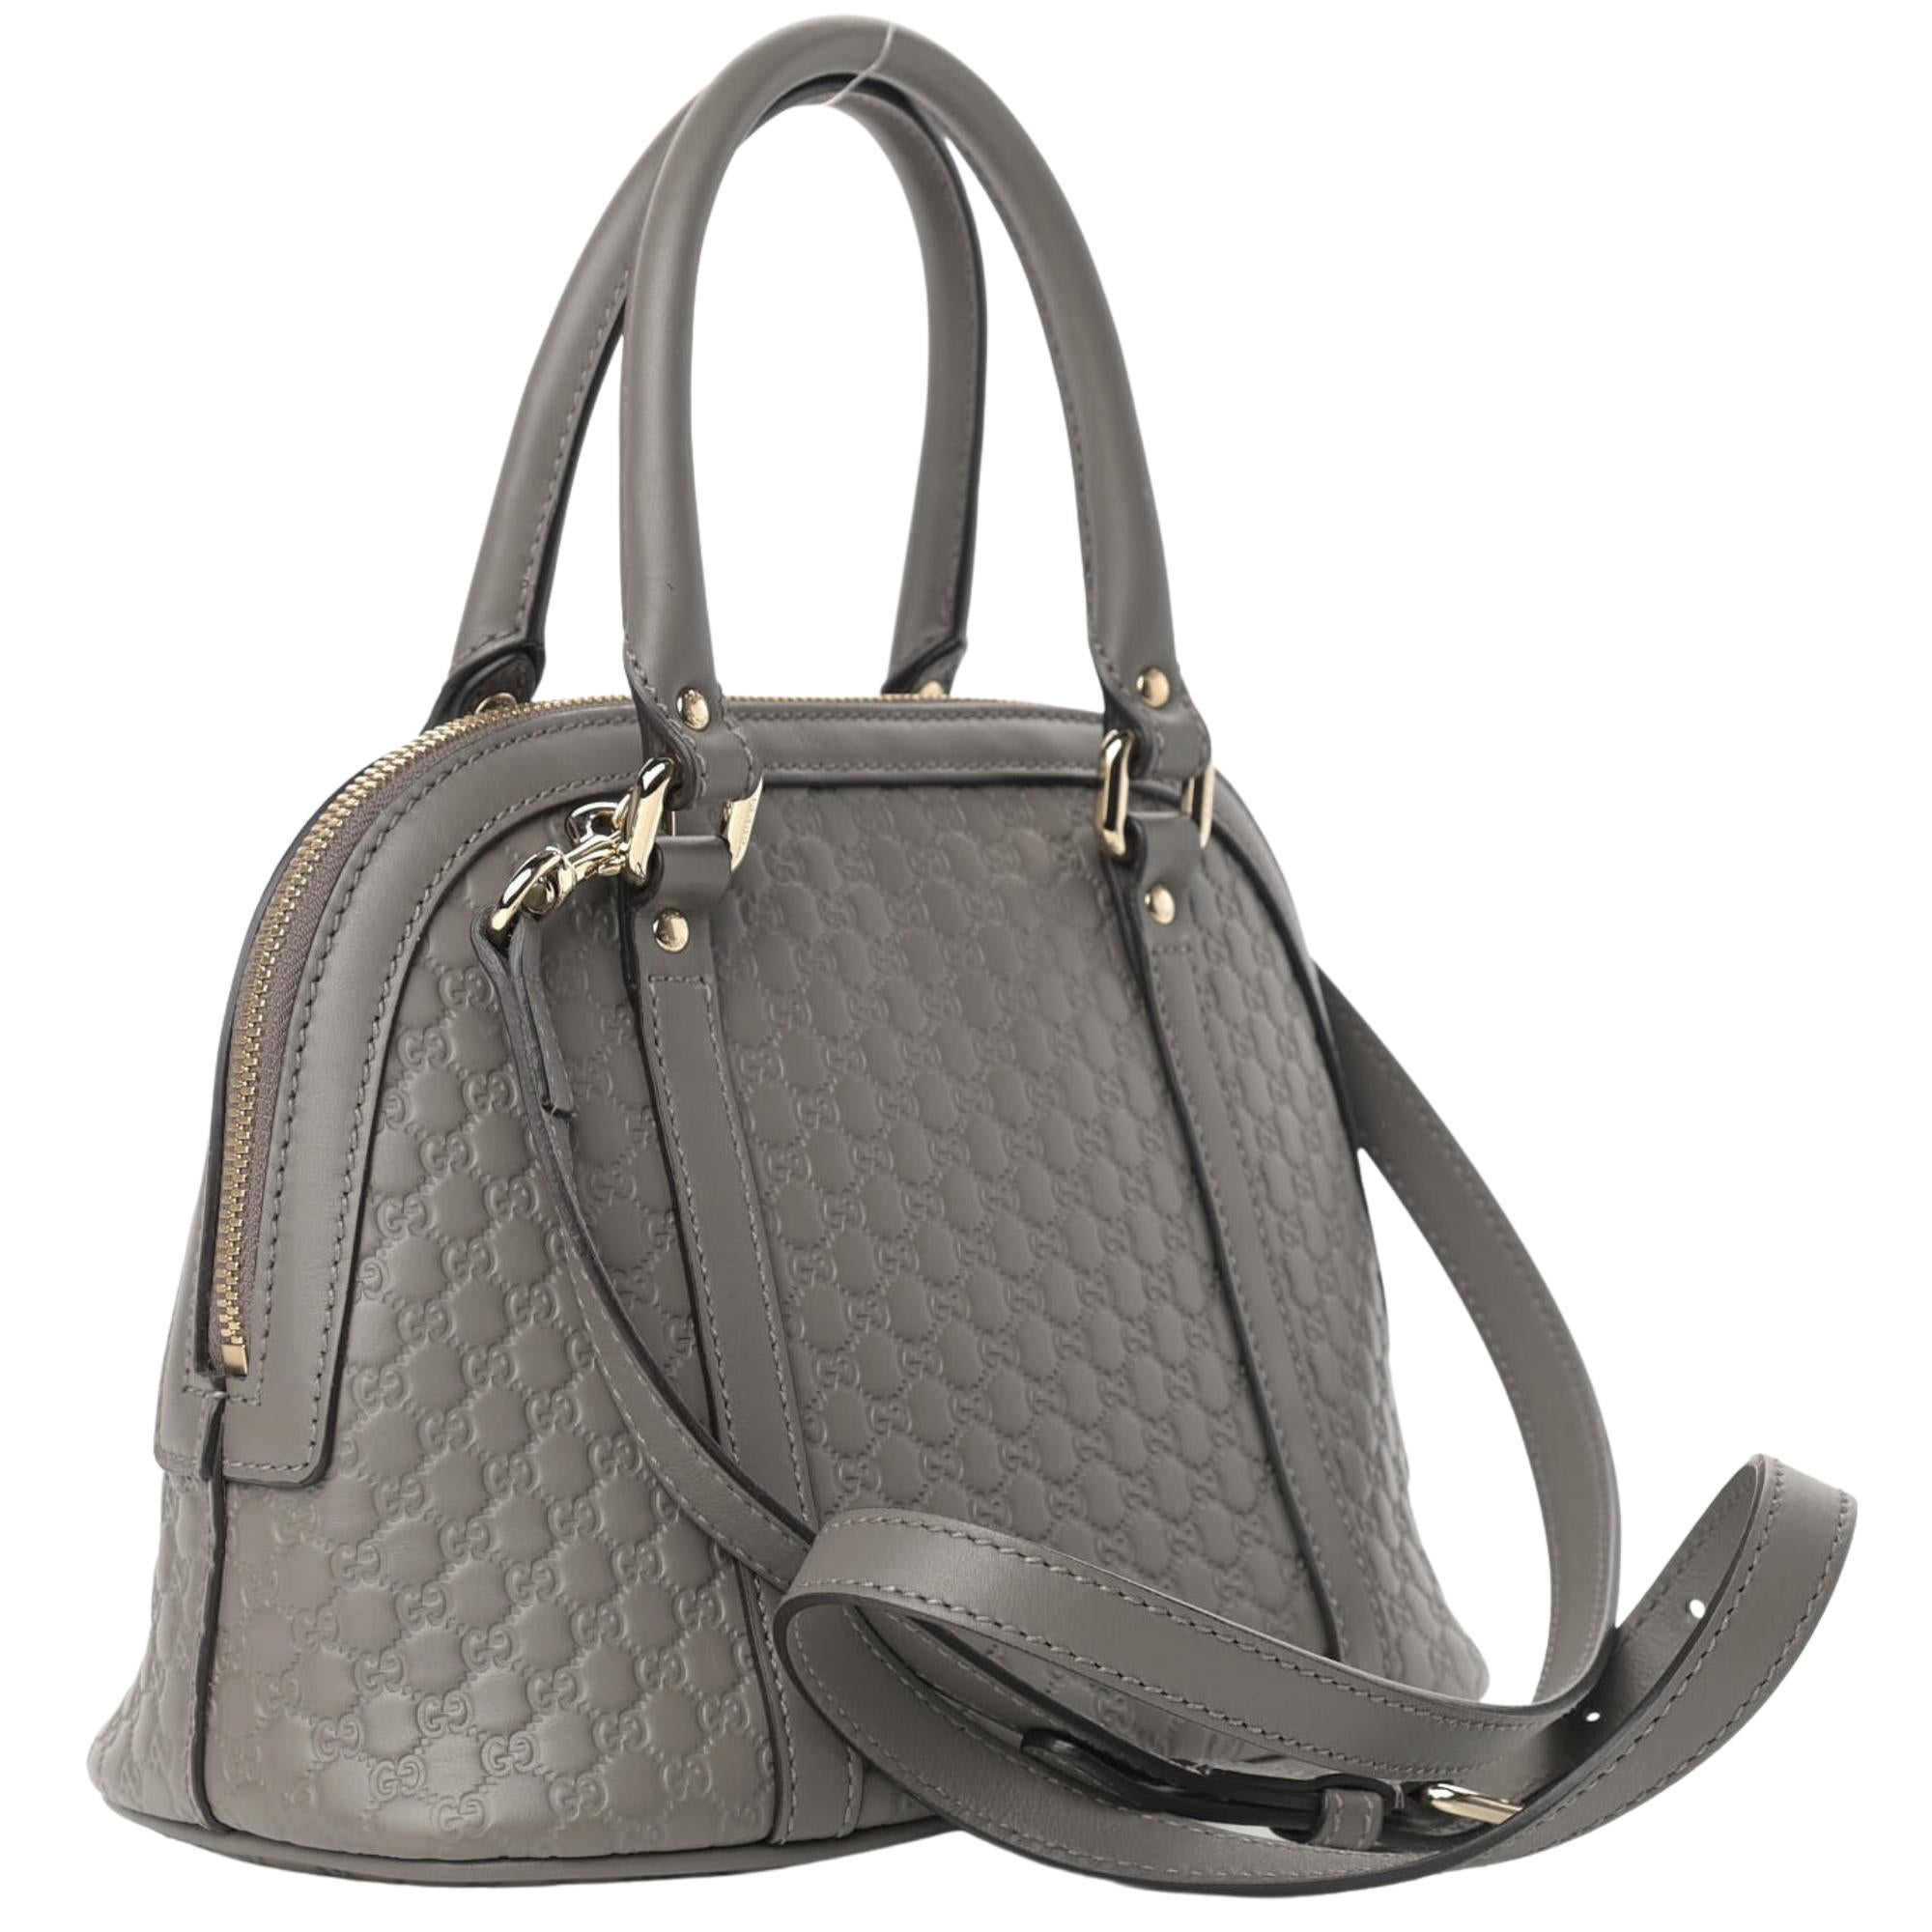 This Gucci bag is made of micro guccissima embossed leather in grey. The bag features dual rolled leather top handles, an optional shoulder strap, and light gold hardware. The double zipper tabs open to a beige fabric interior with a patch